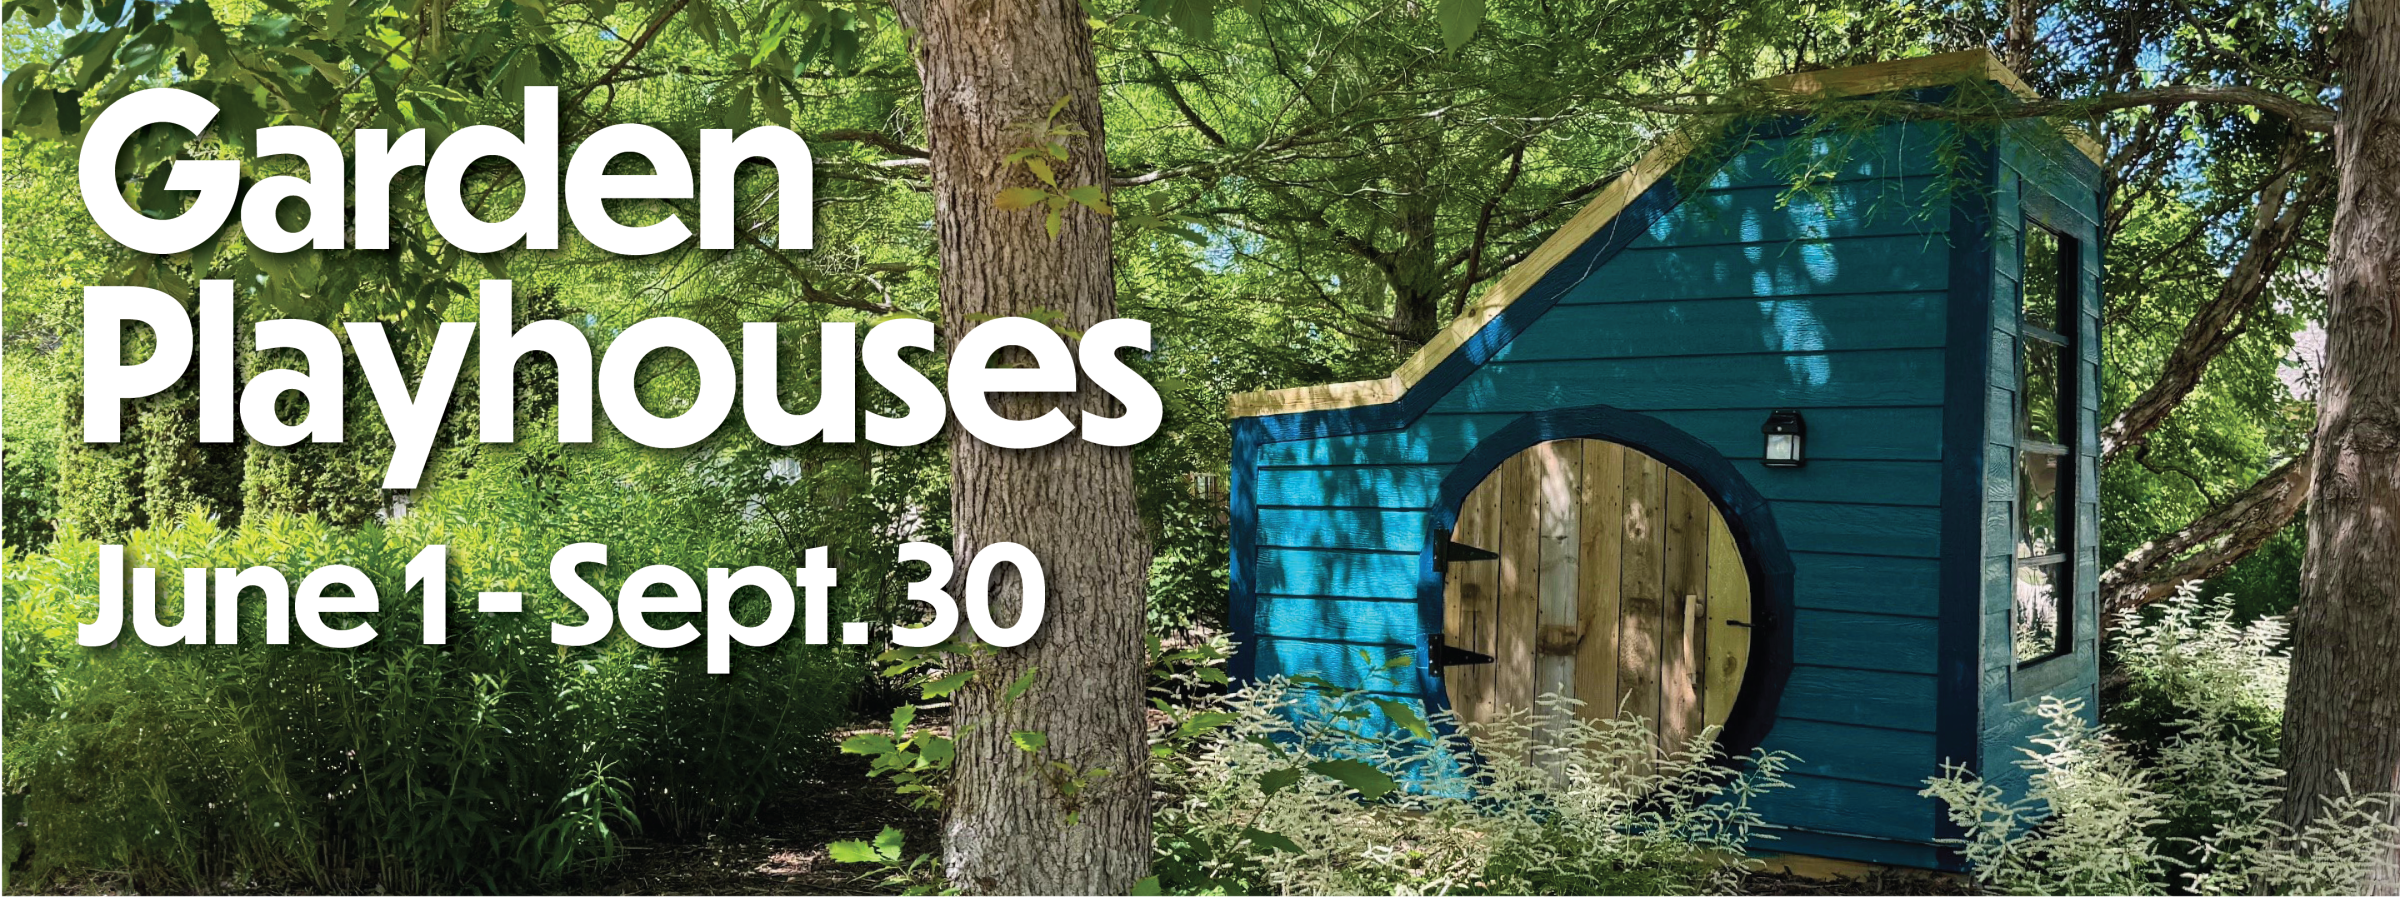 Blue playhouse in the woods with text that reads Garden Playhouse June 1 - Sept. 30